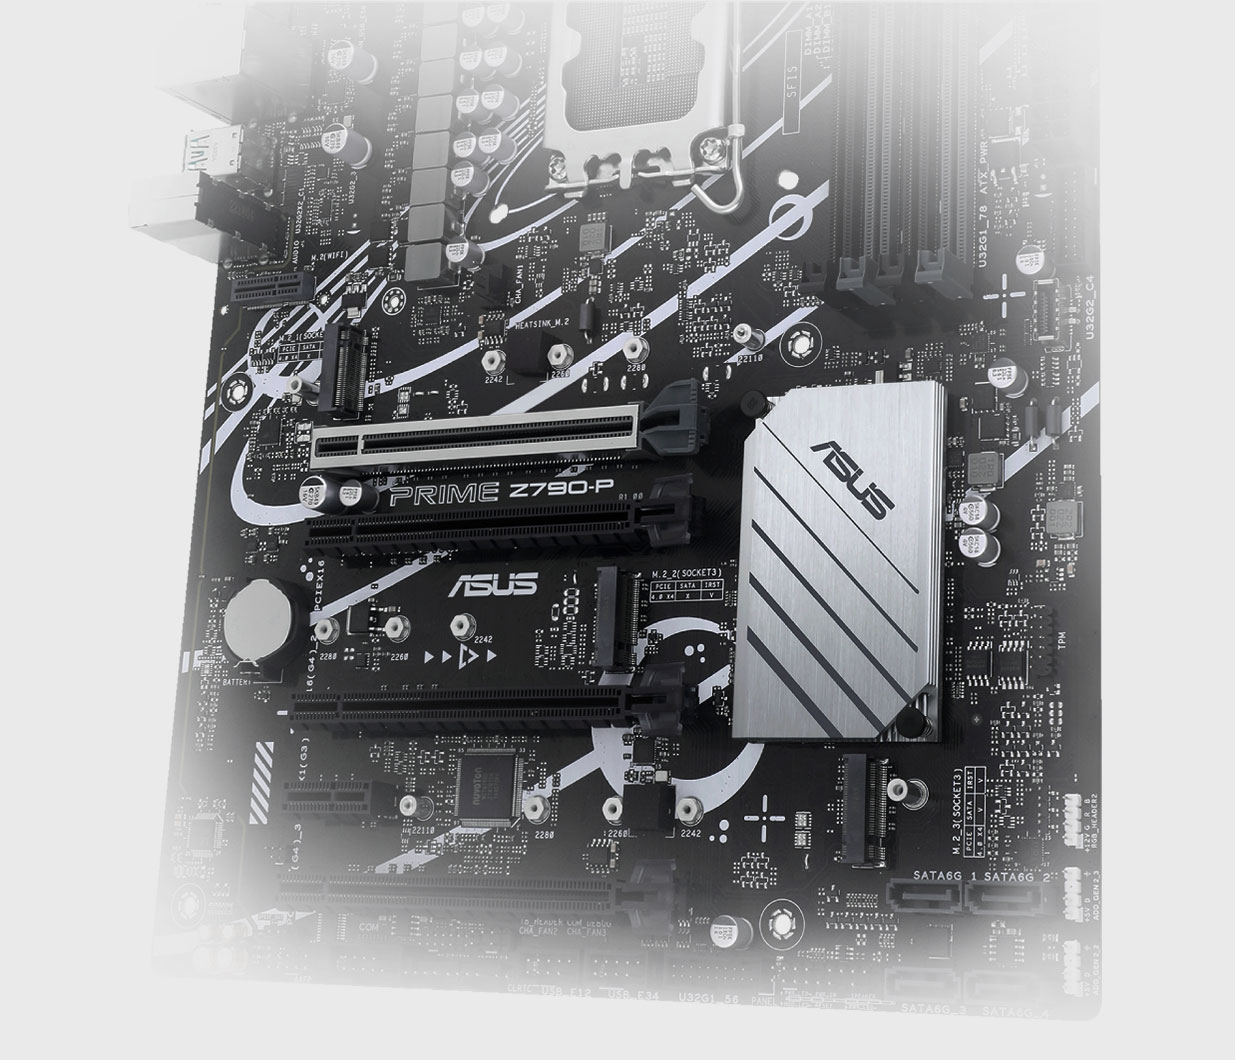 The PRIME Z790-P motherboard supports three M.2 slots.